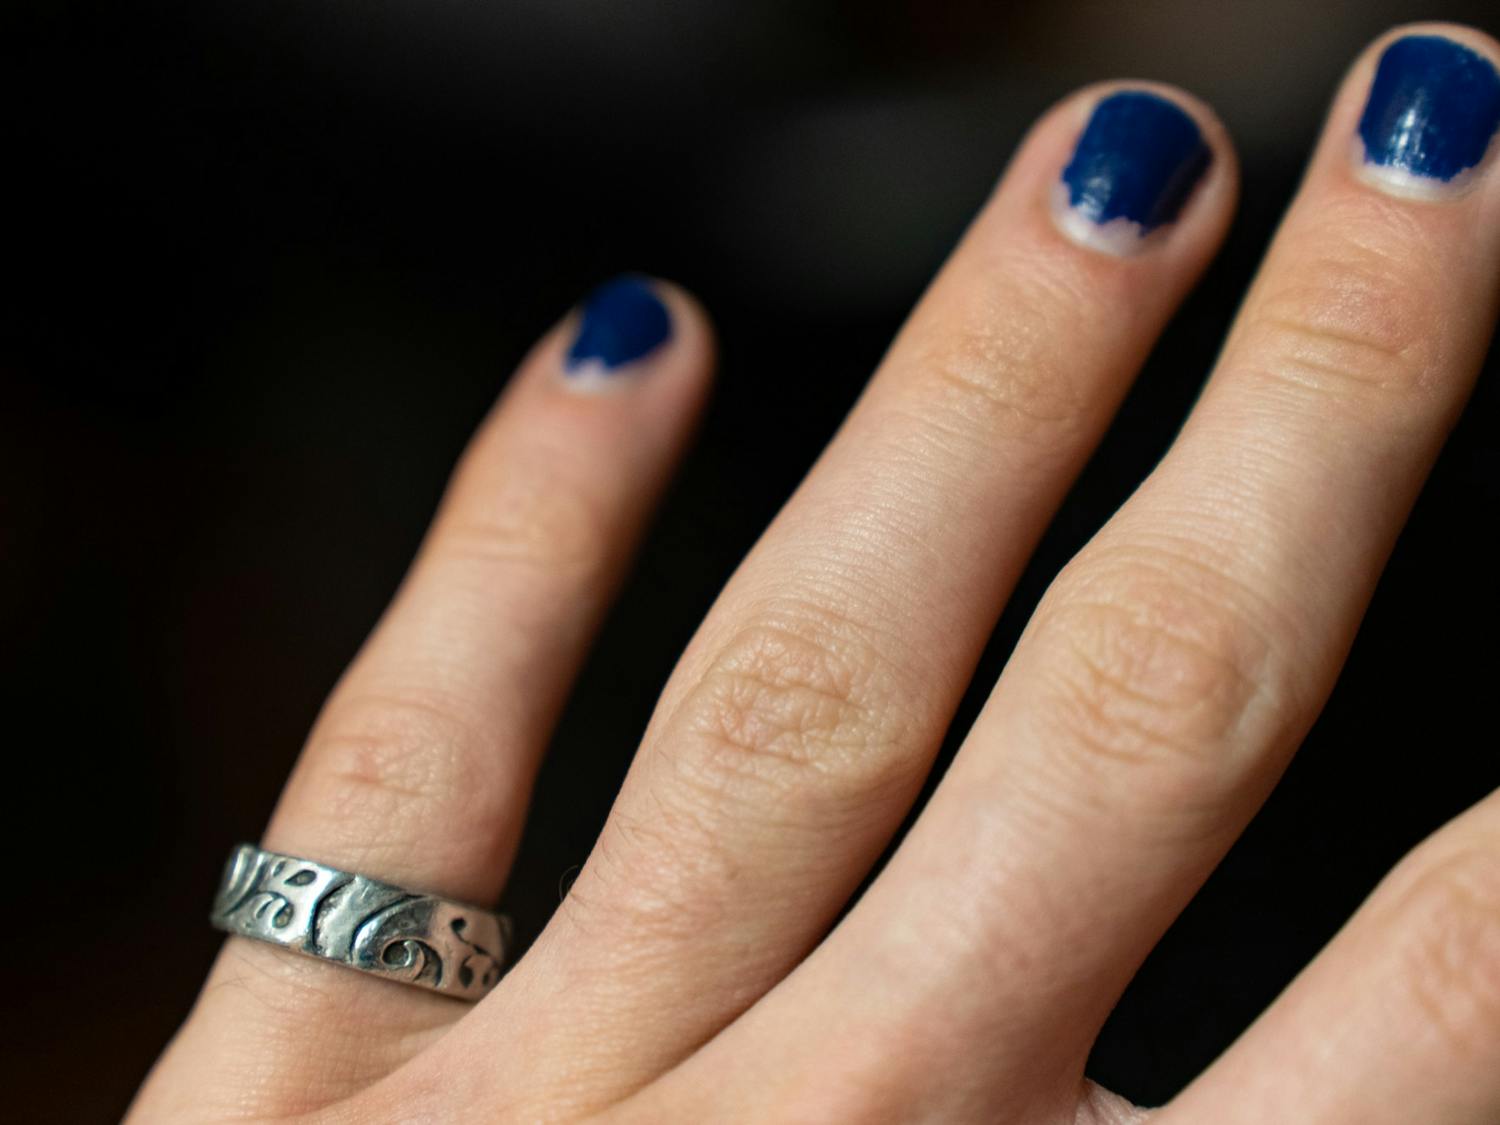 DTH Photo Illustration. A UNC student wears a ring on his finger.